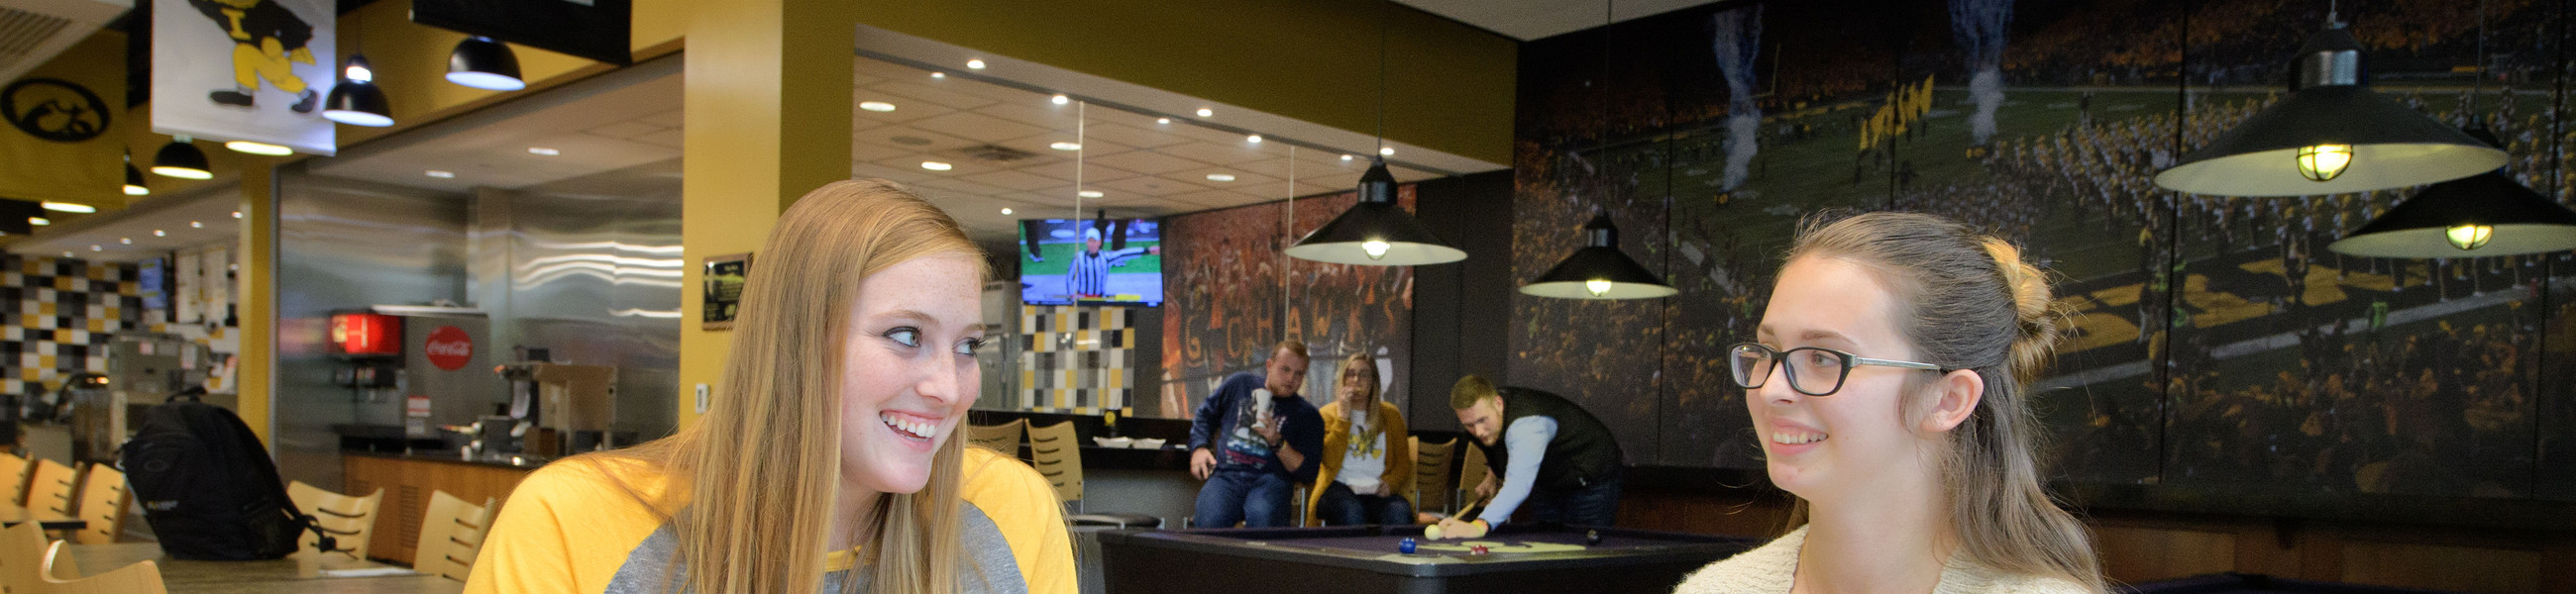 students study and play pool at Black's Gold Grill in Petersen Residence Hall